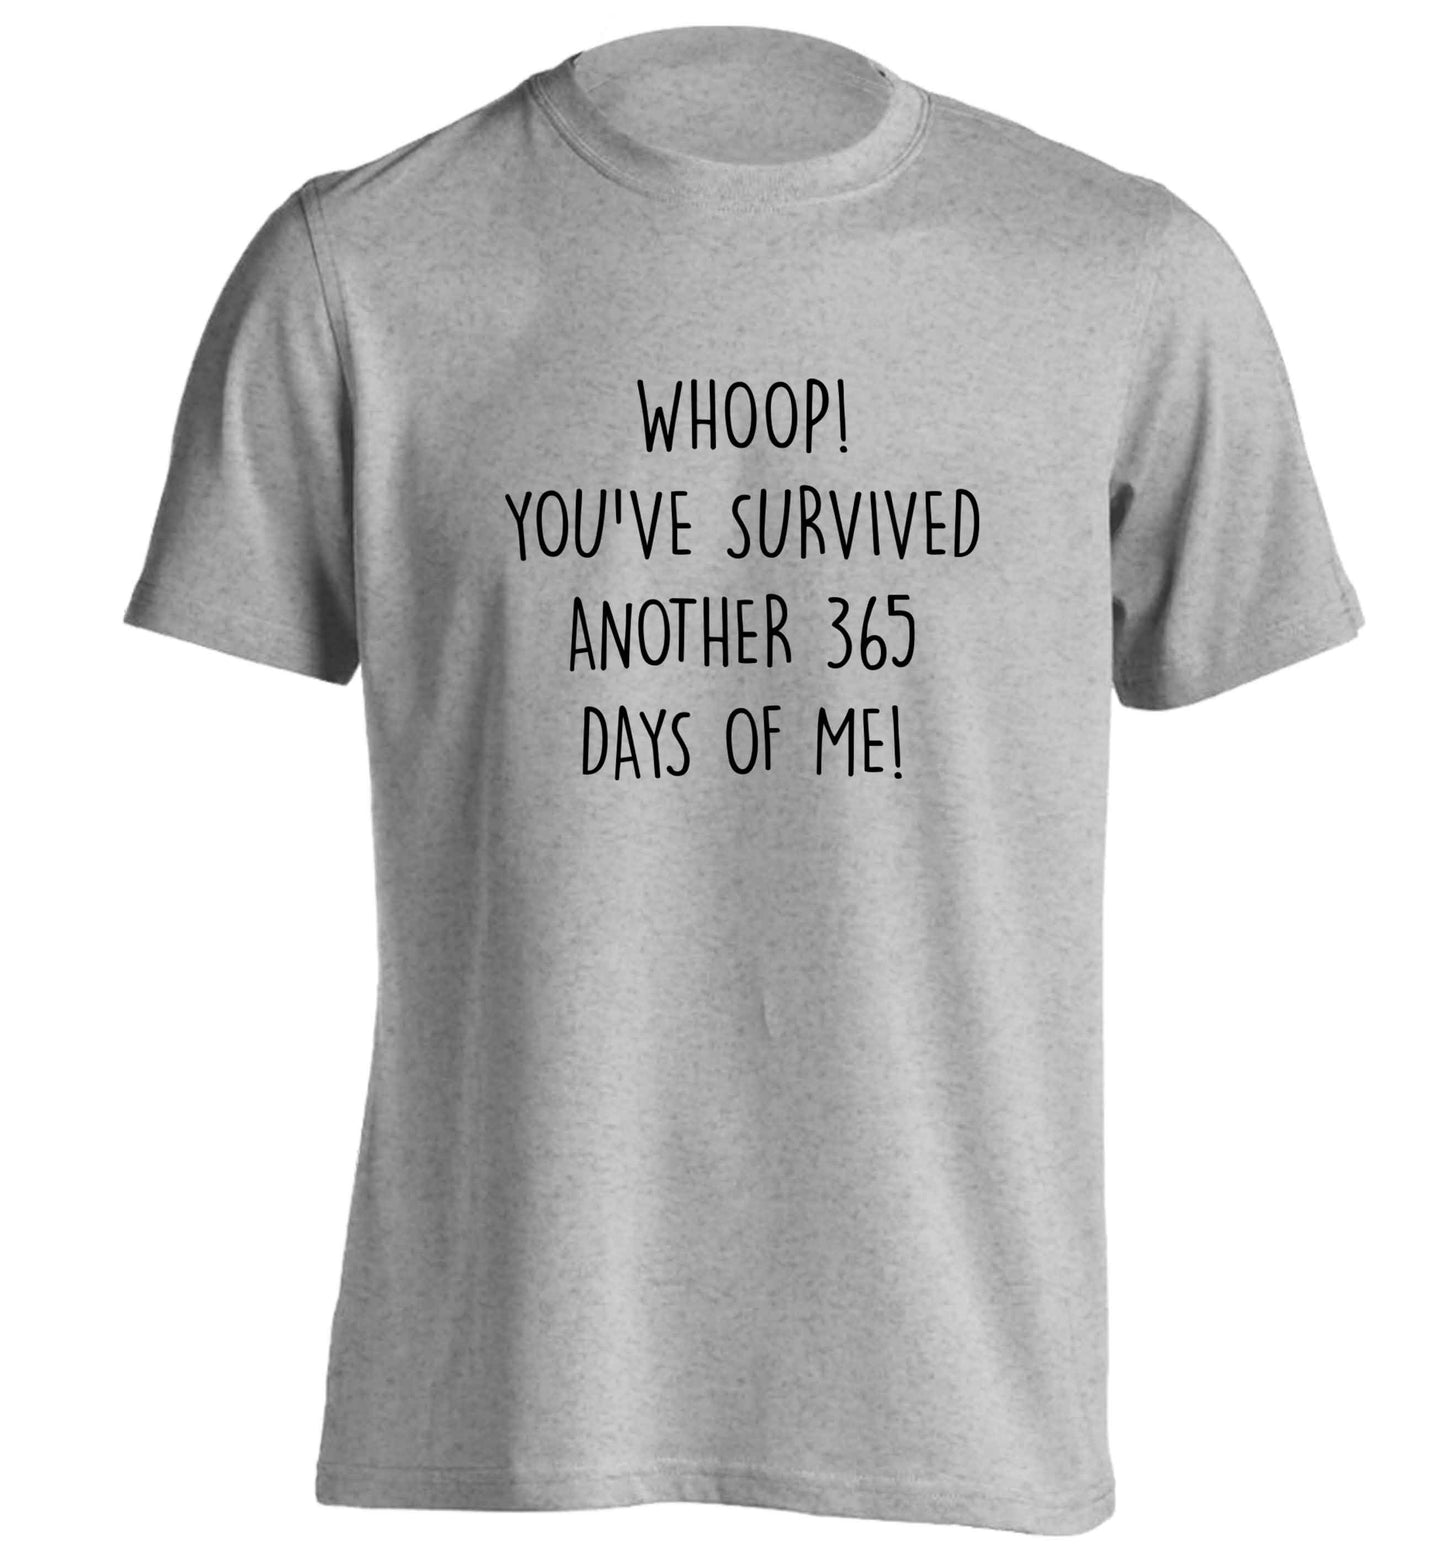 Whoop! You've survived another 365 days with me! adults unisex grey Tshirt 2XL